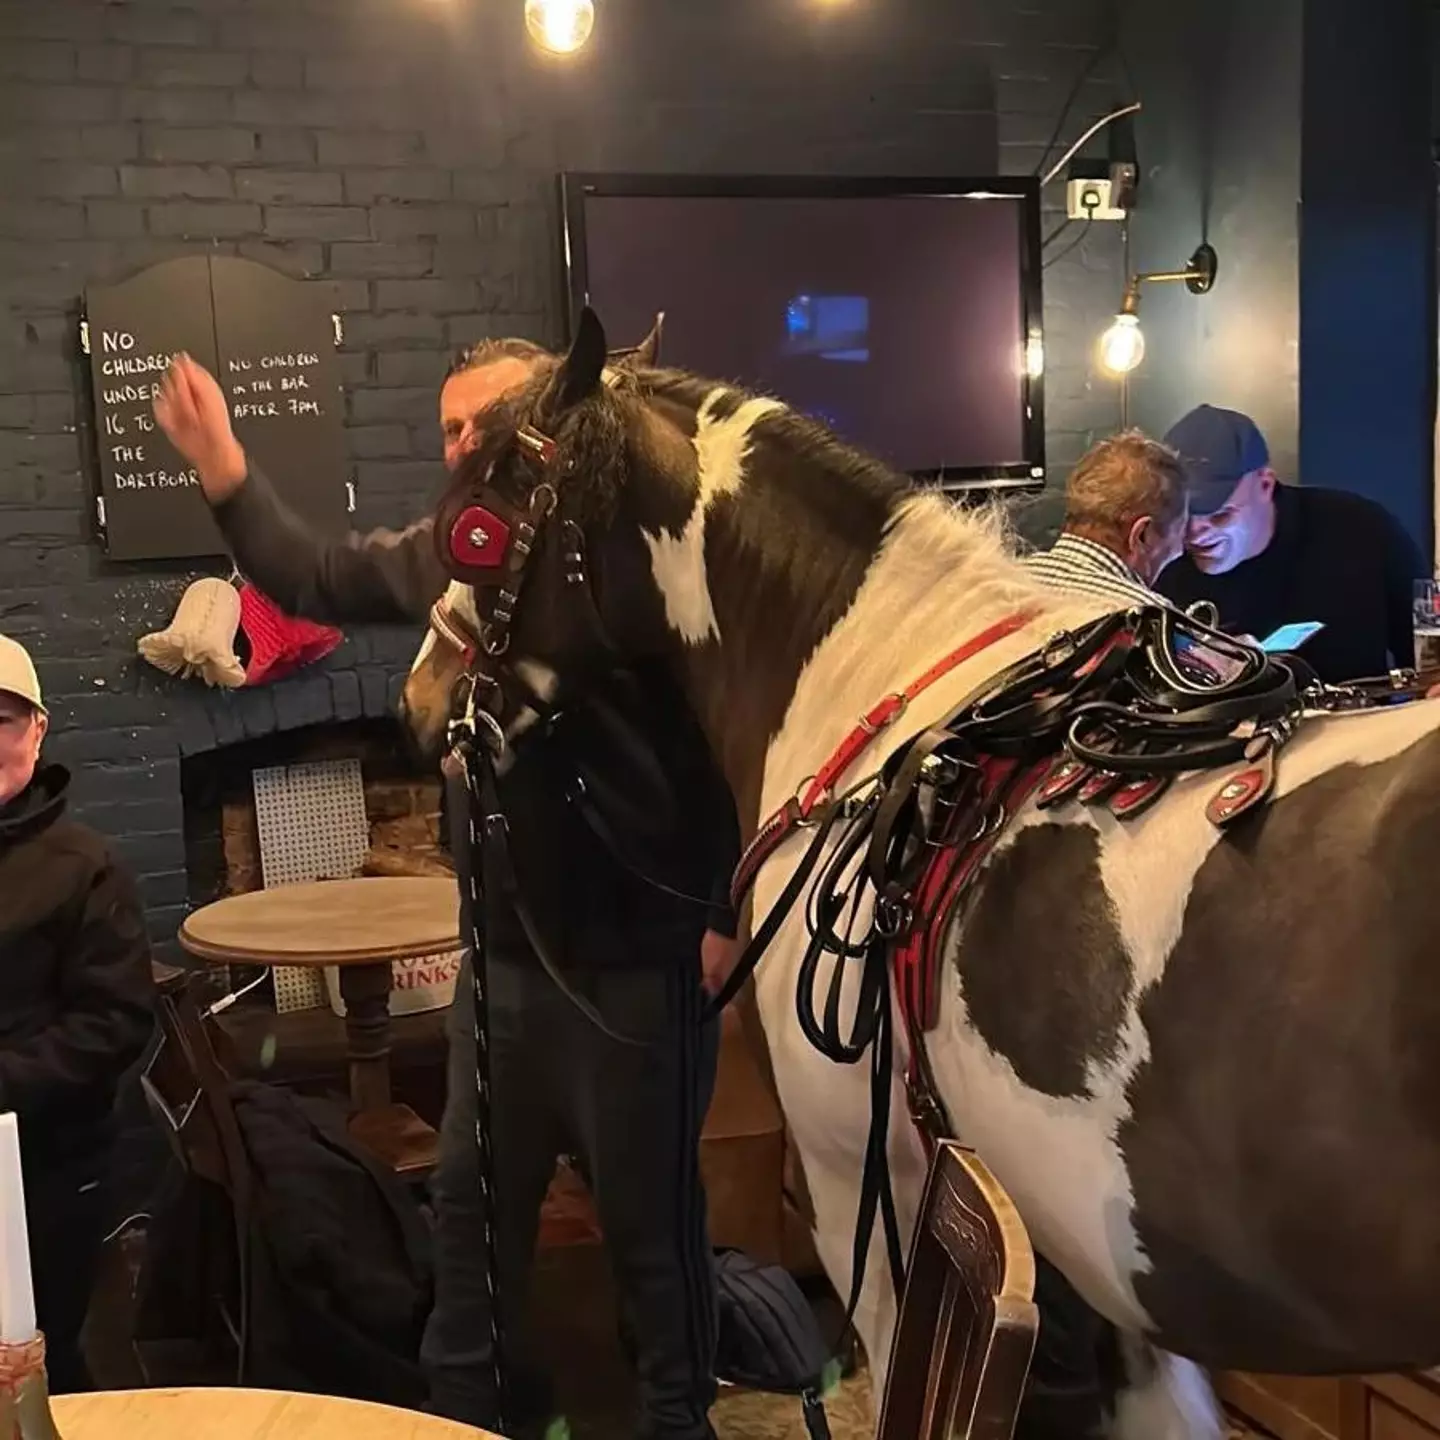 The punter brought his horse with him for a pint.